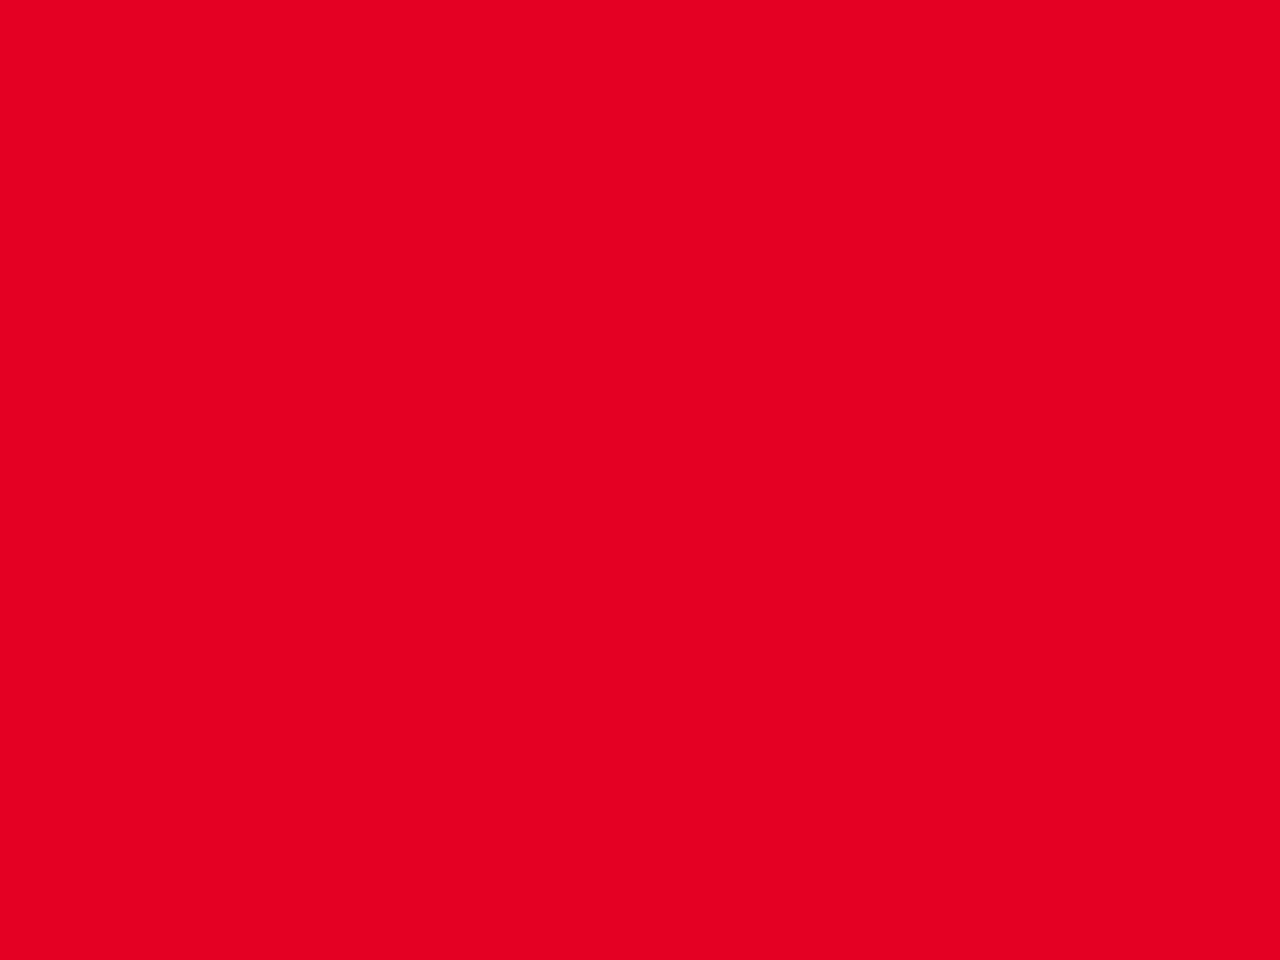 1280x960 Cadmium Red Solid Color Background